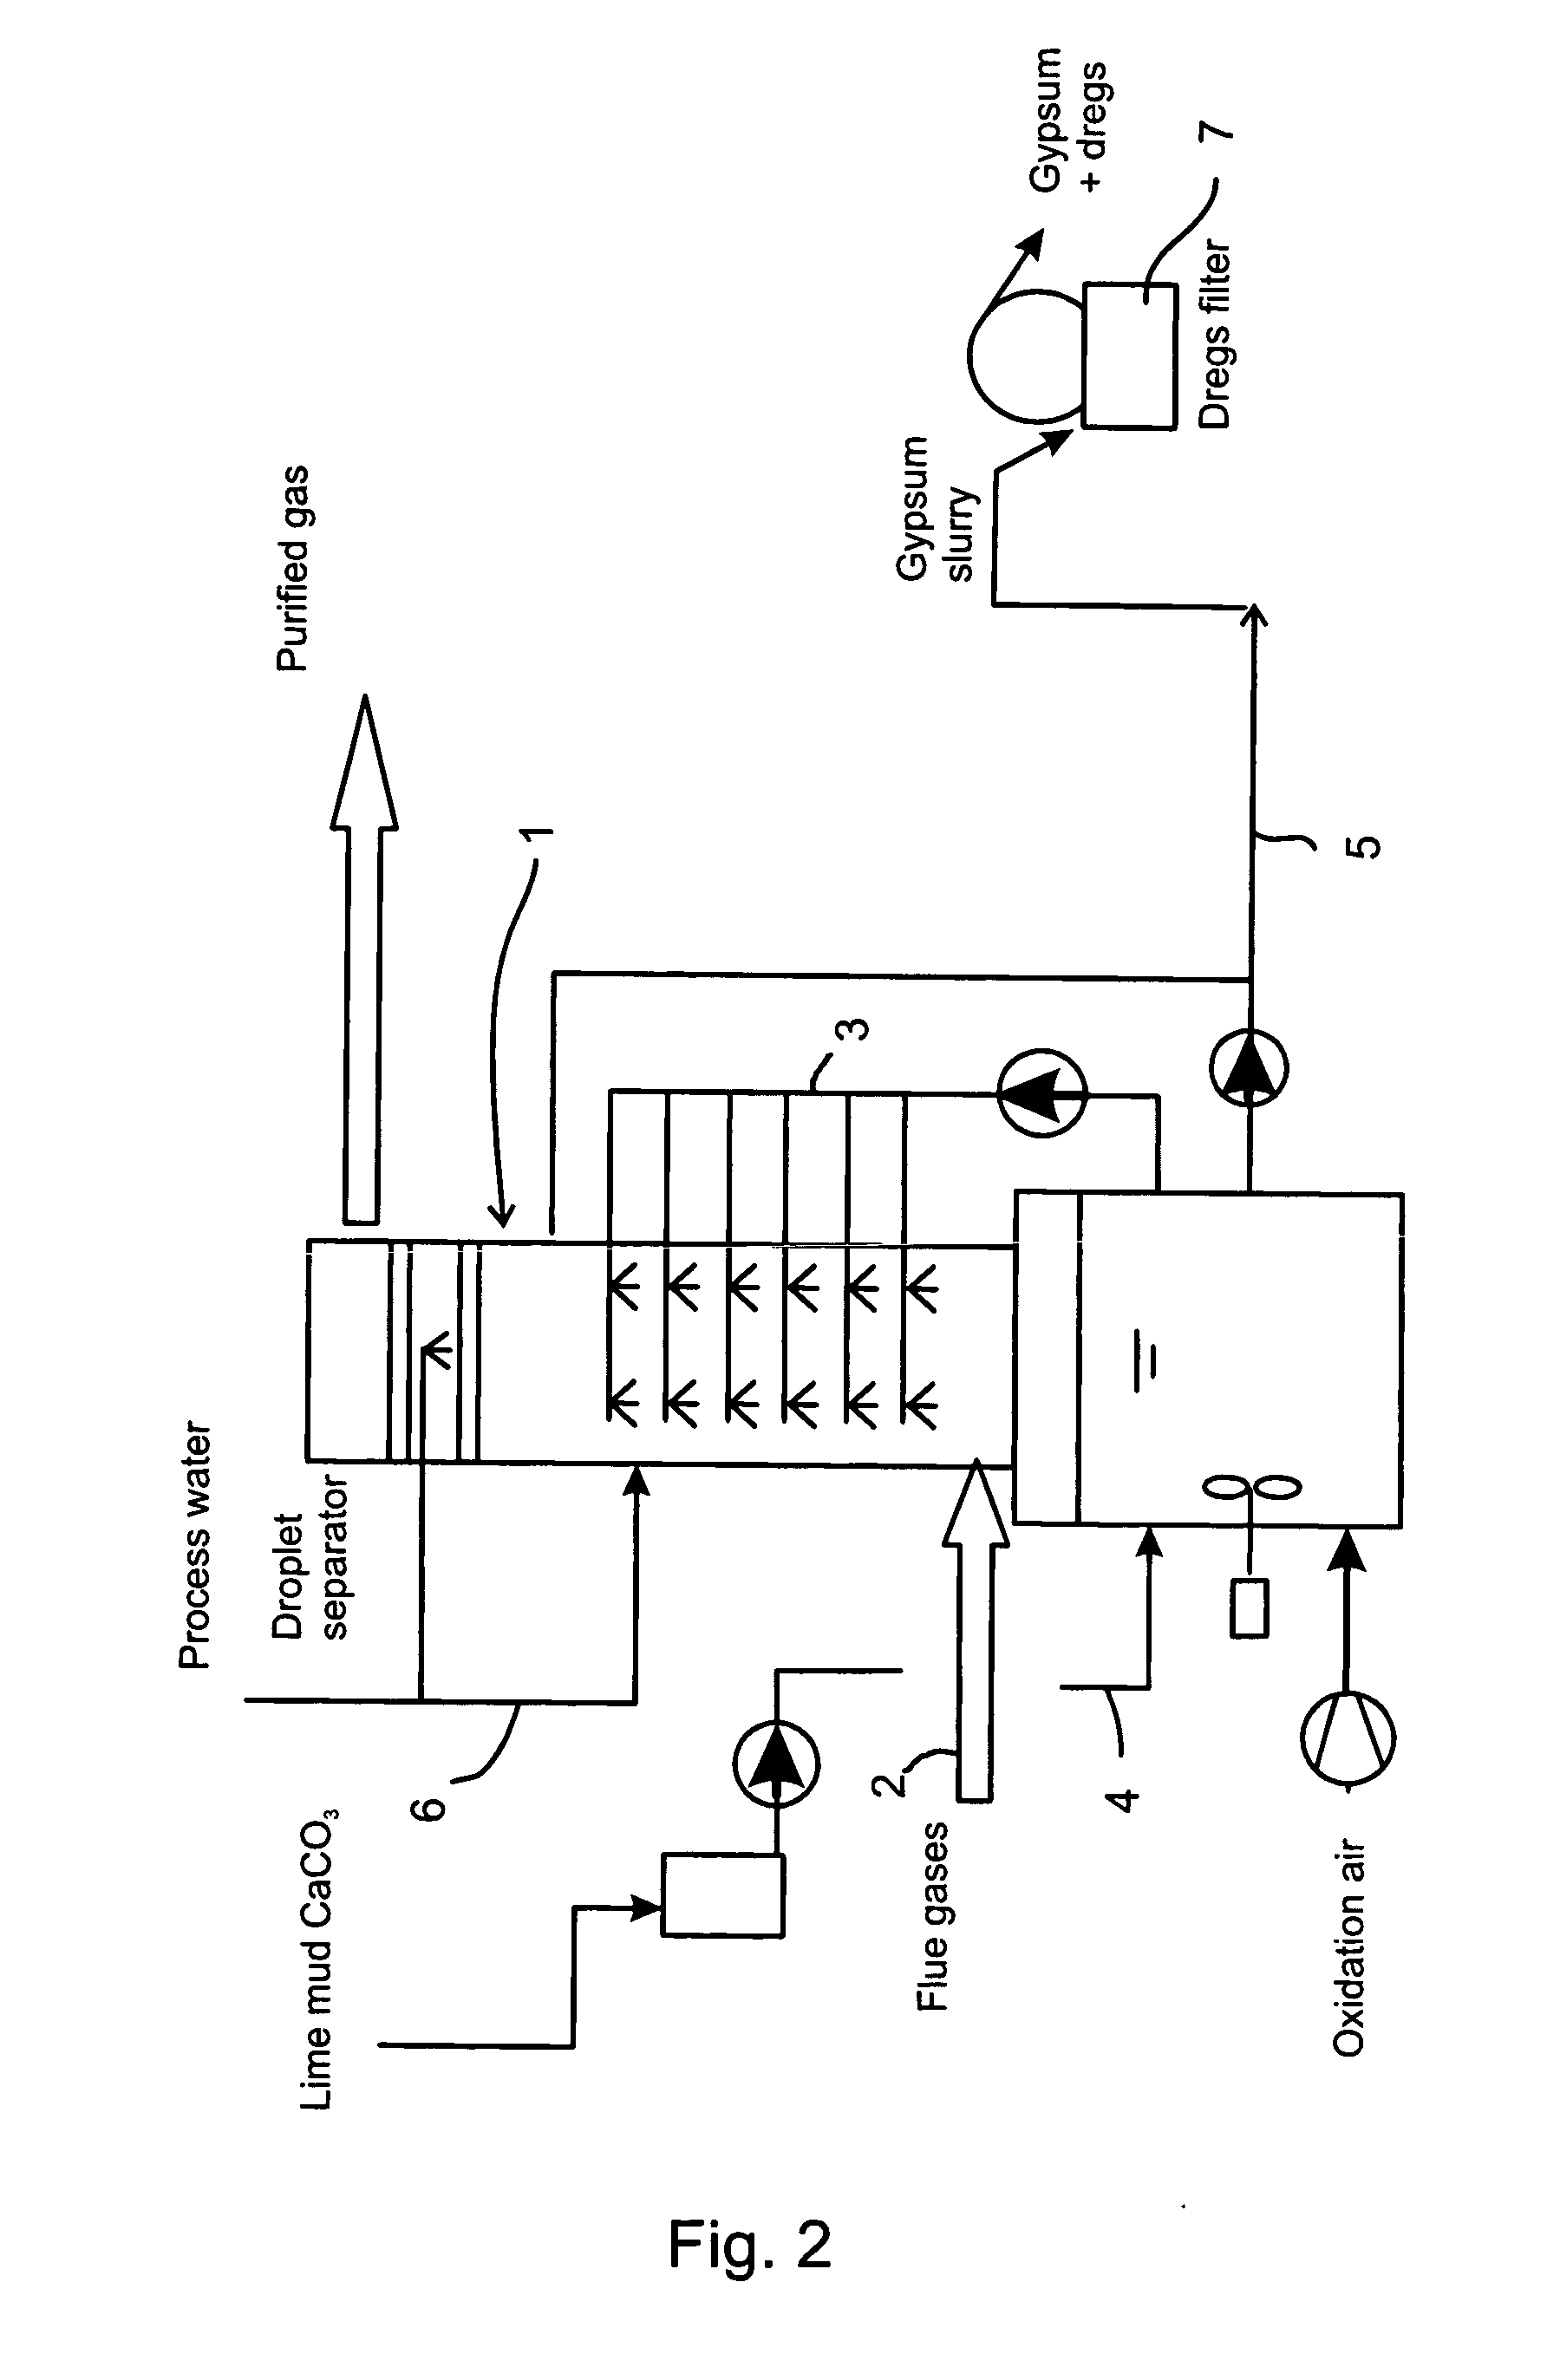 Method for processing flue gases